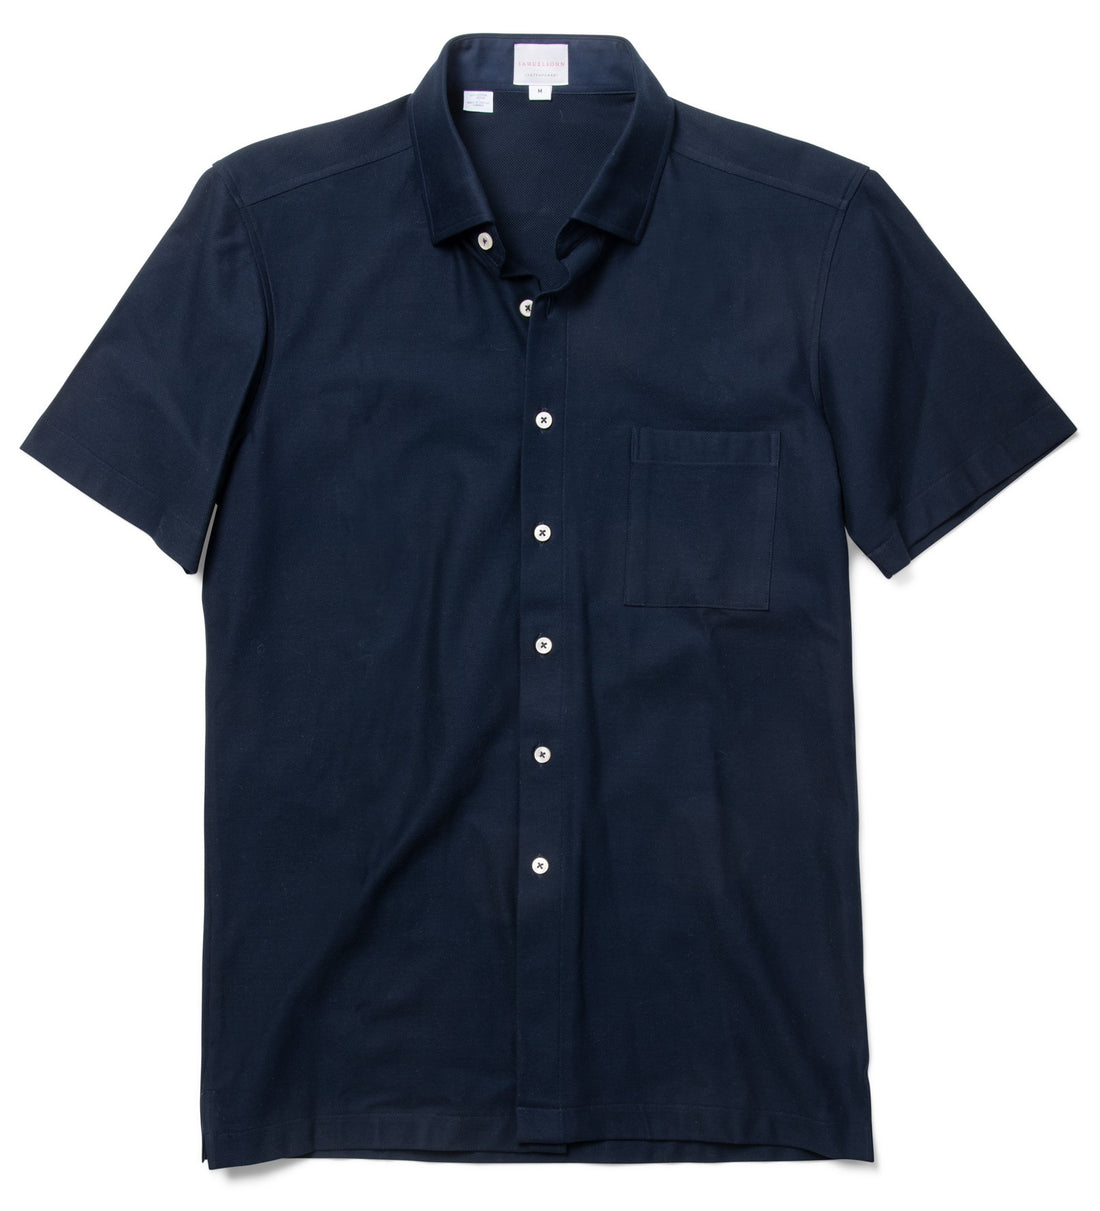  "Navy blue designer pique knit shirt is breathable and lightweight in 100 percent cotton from VUE collection by Samuelsohn"